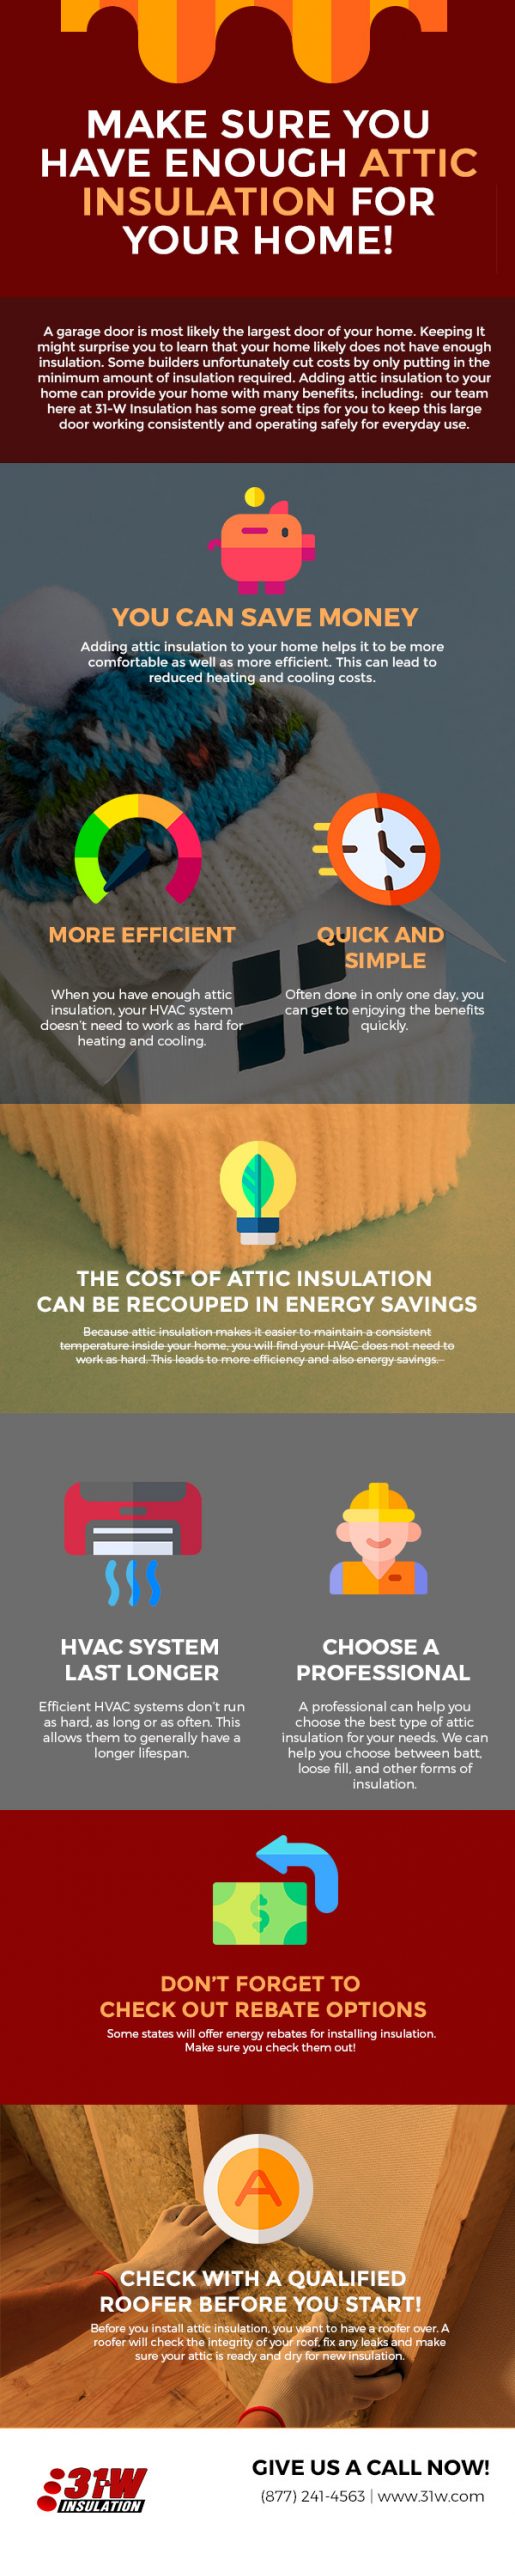 Make Sure You Have Enough Attic Insulation for Your Home! [infographic]